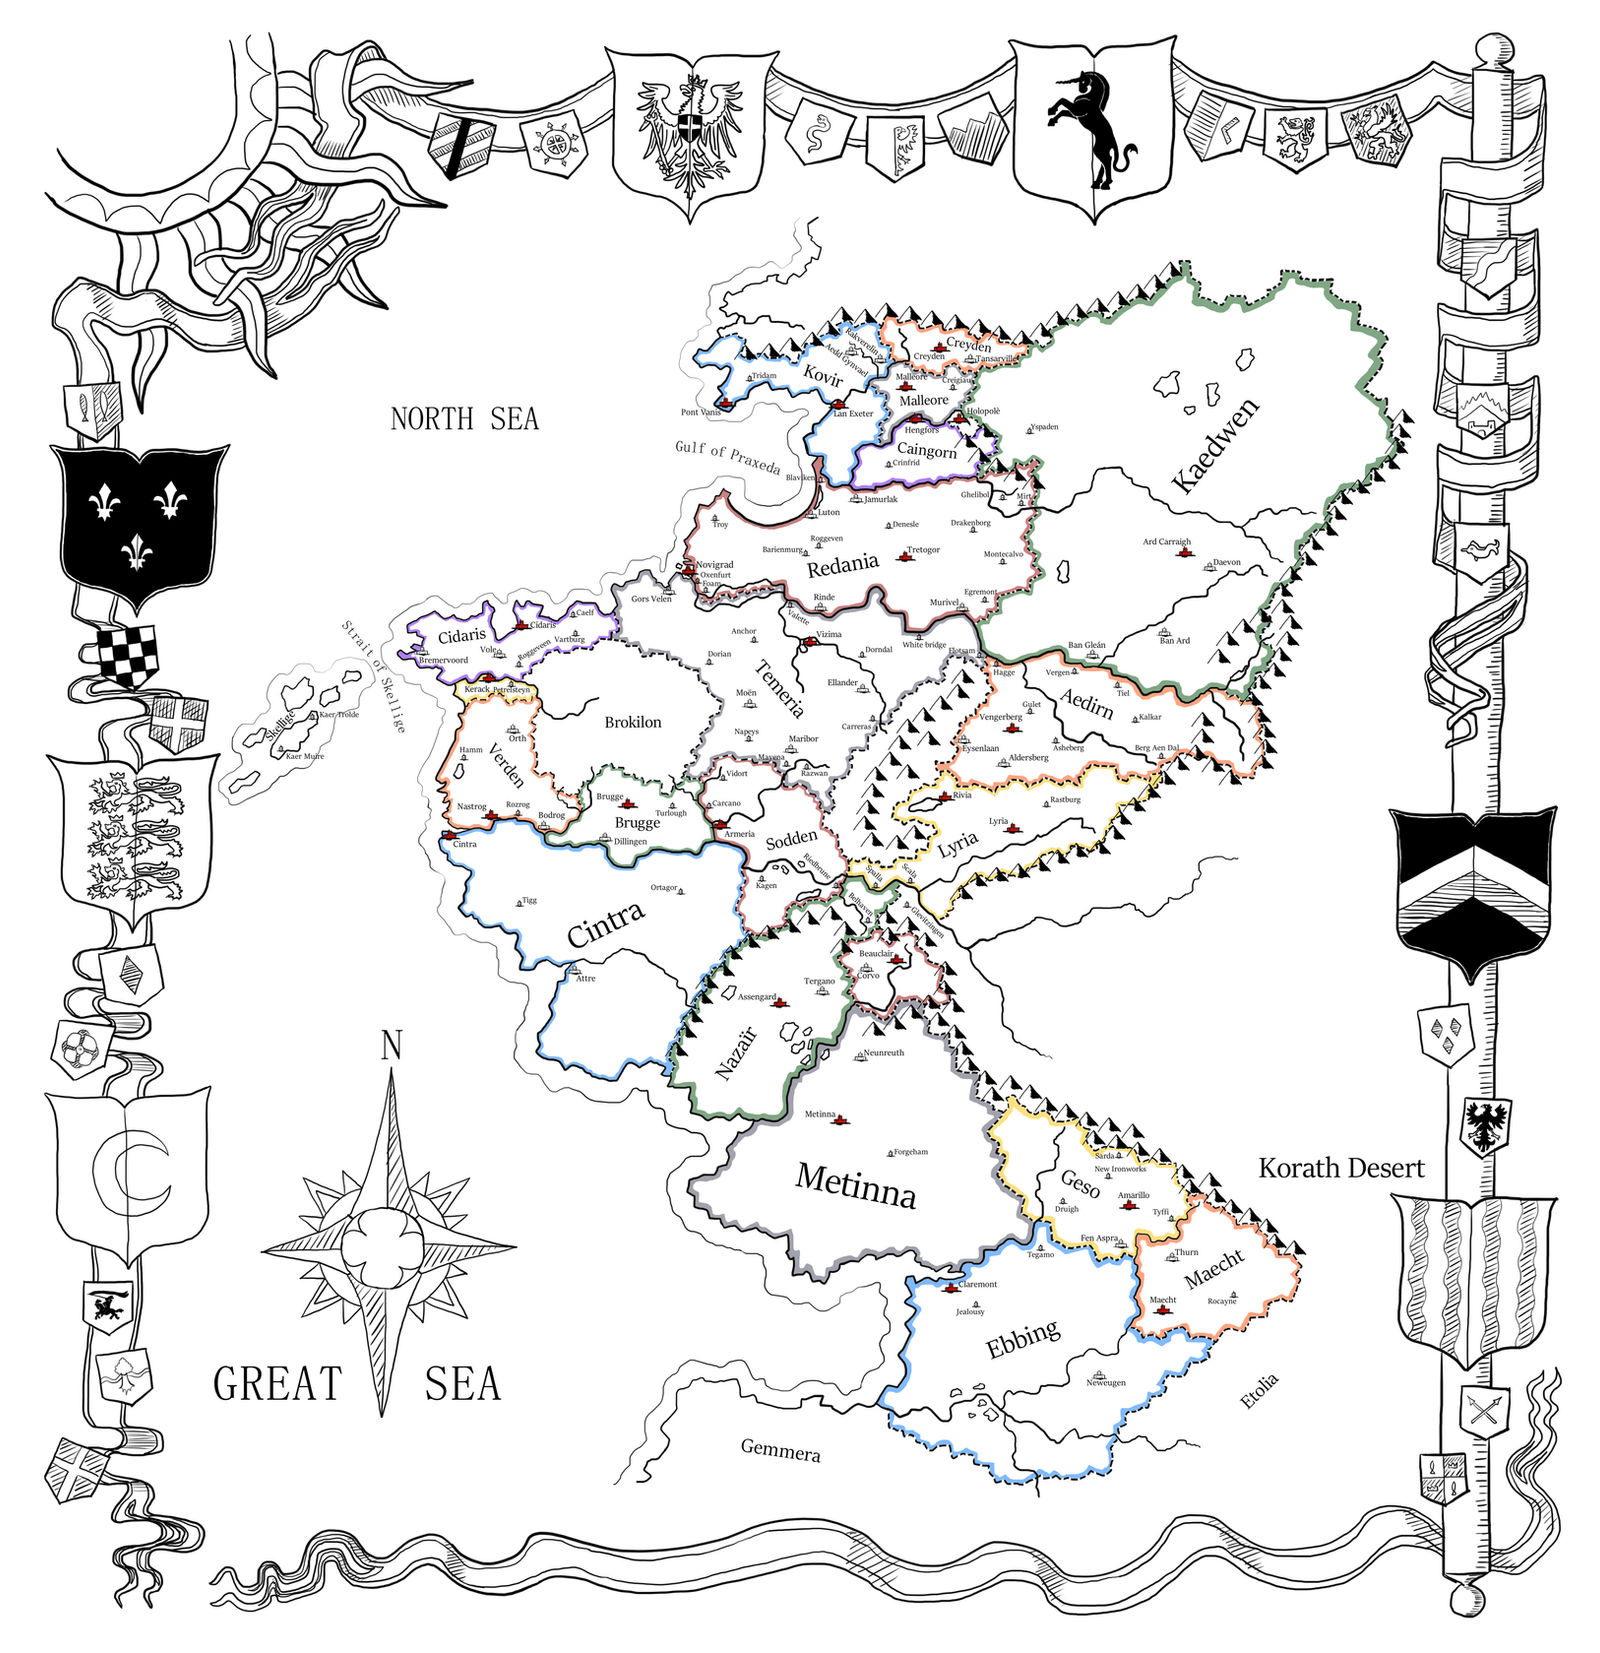 The Witcher World Map (My Version) By Truisticwharf On Deviantart